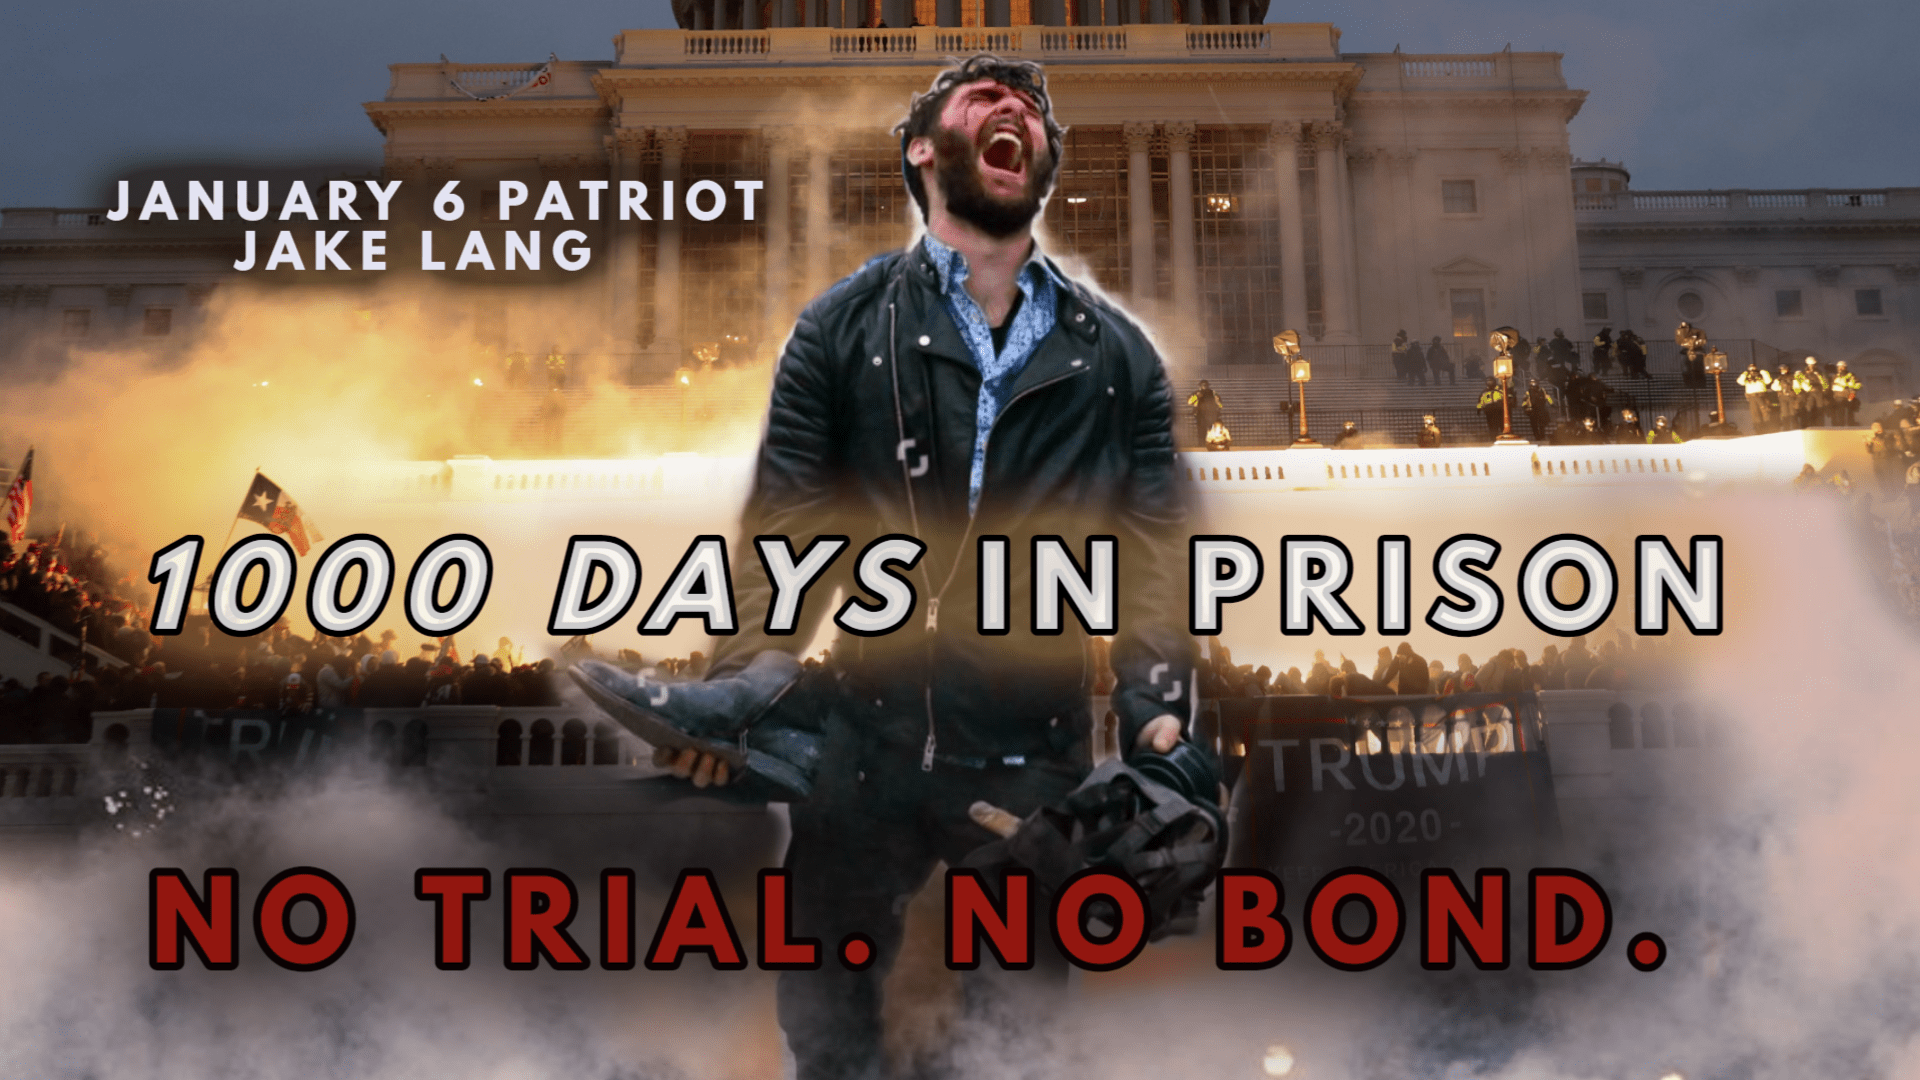 "They're torturing us!"  - Political prisoner J6 Jake Lang calls for help after 1,200 days without trial in prison - Horseback protest planned for Wednesday |  The Gateway expert